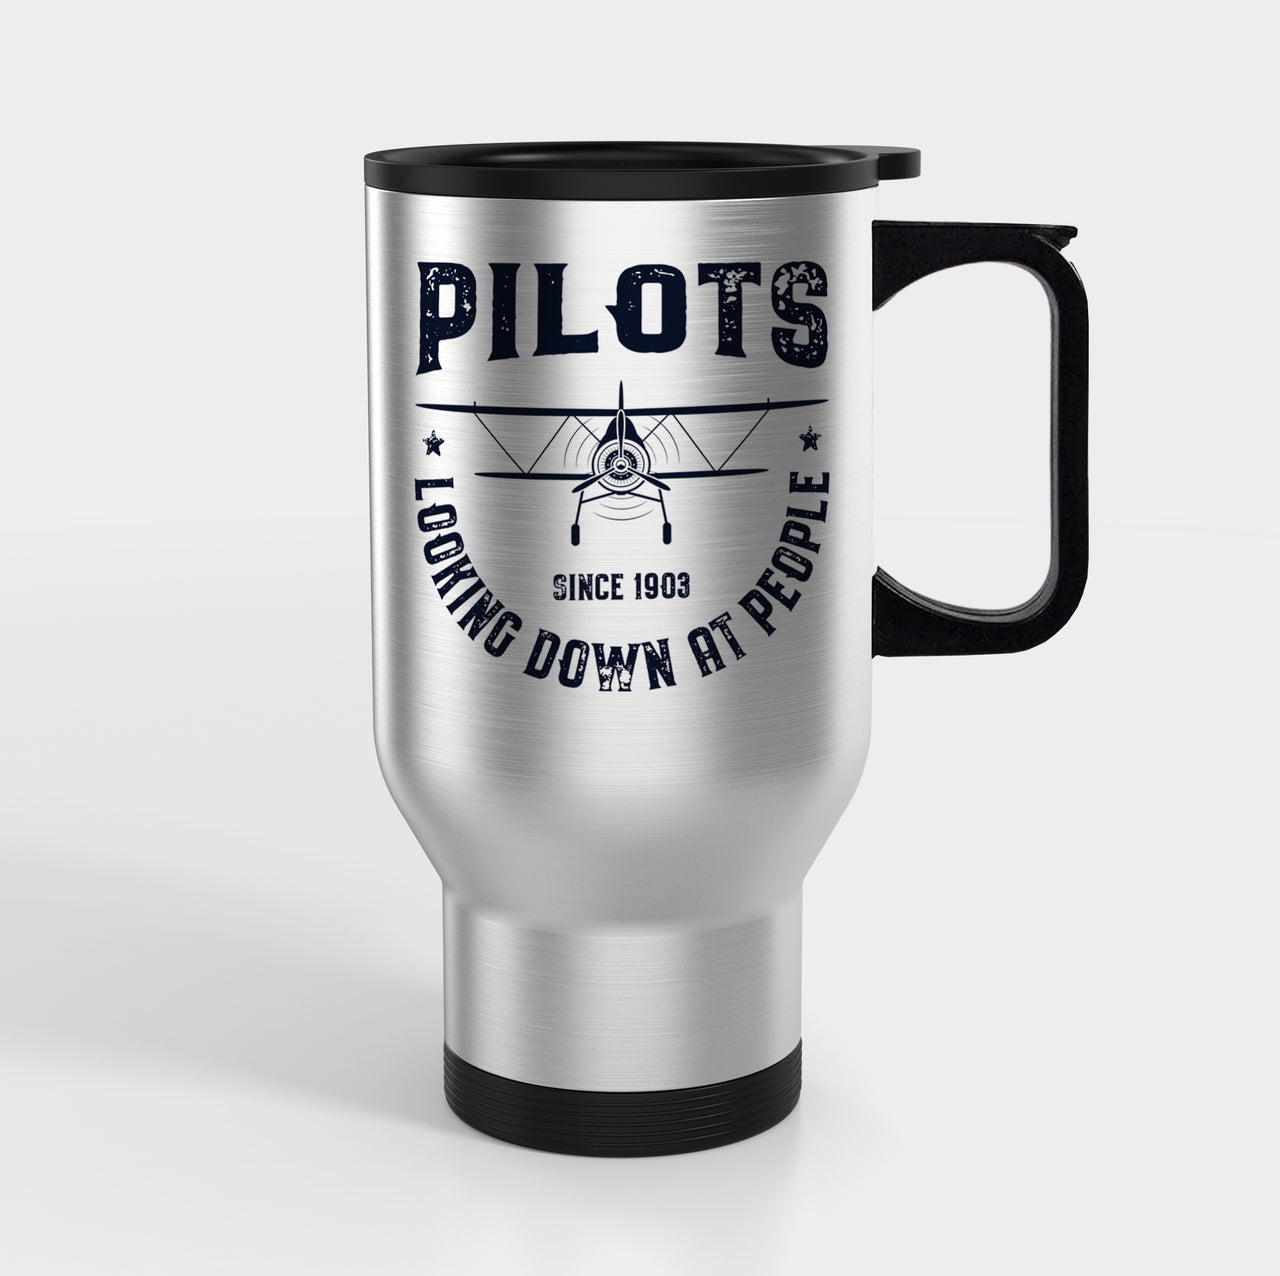 Pilots Looking Down at People Since 1903 Designed Travel Mugs (With Holder)